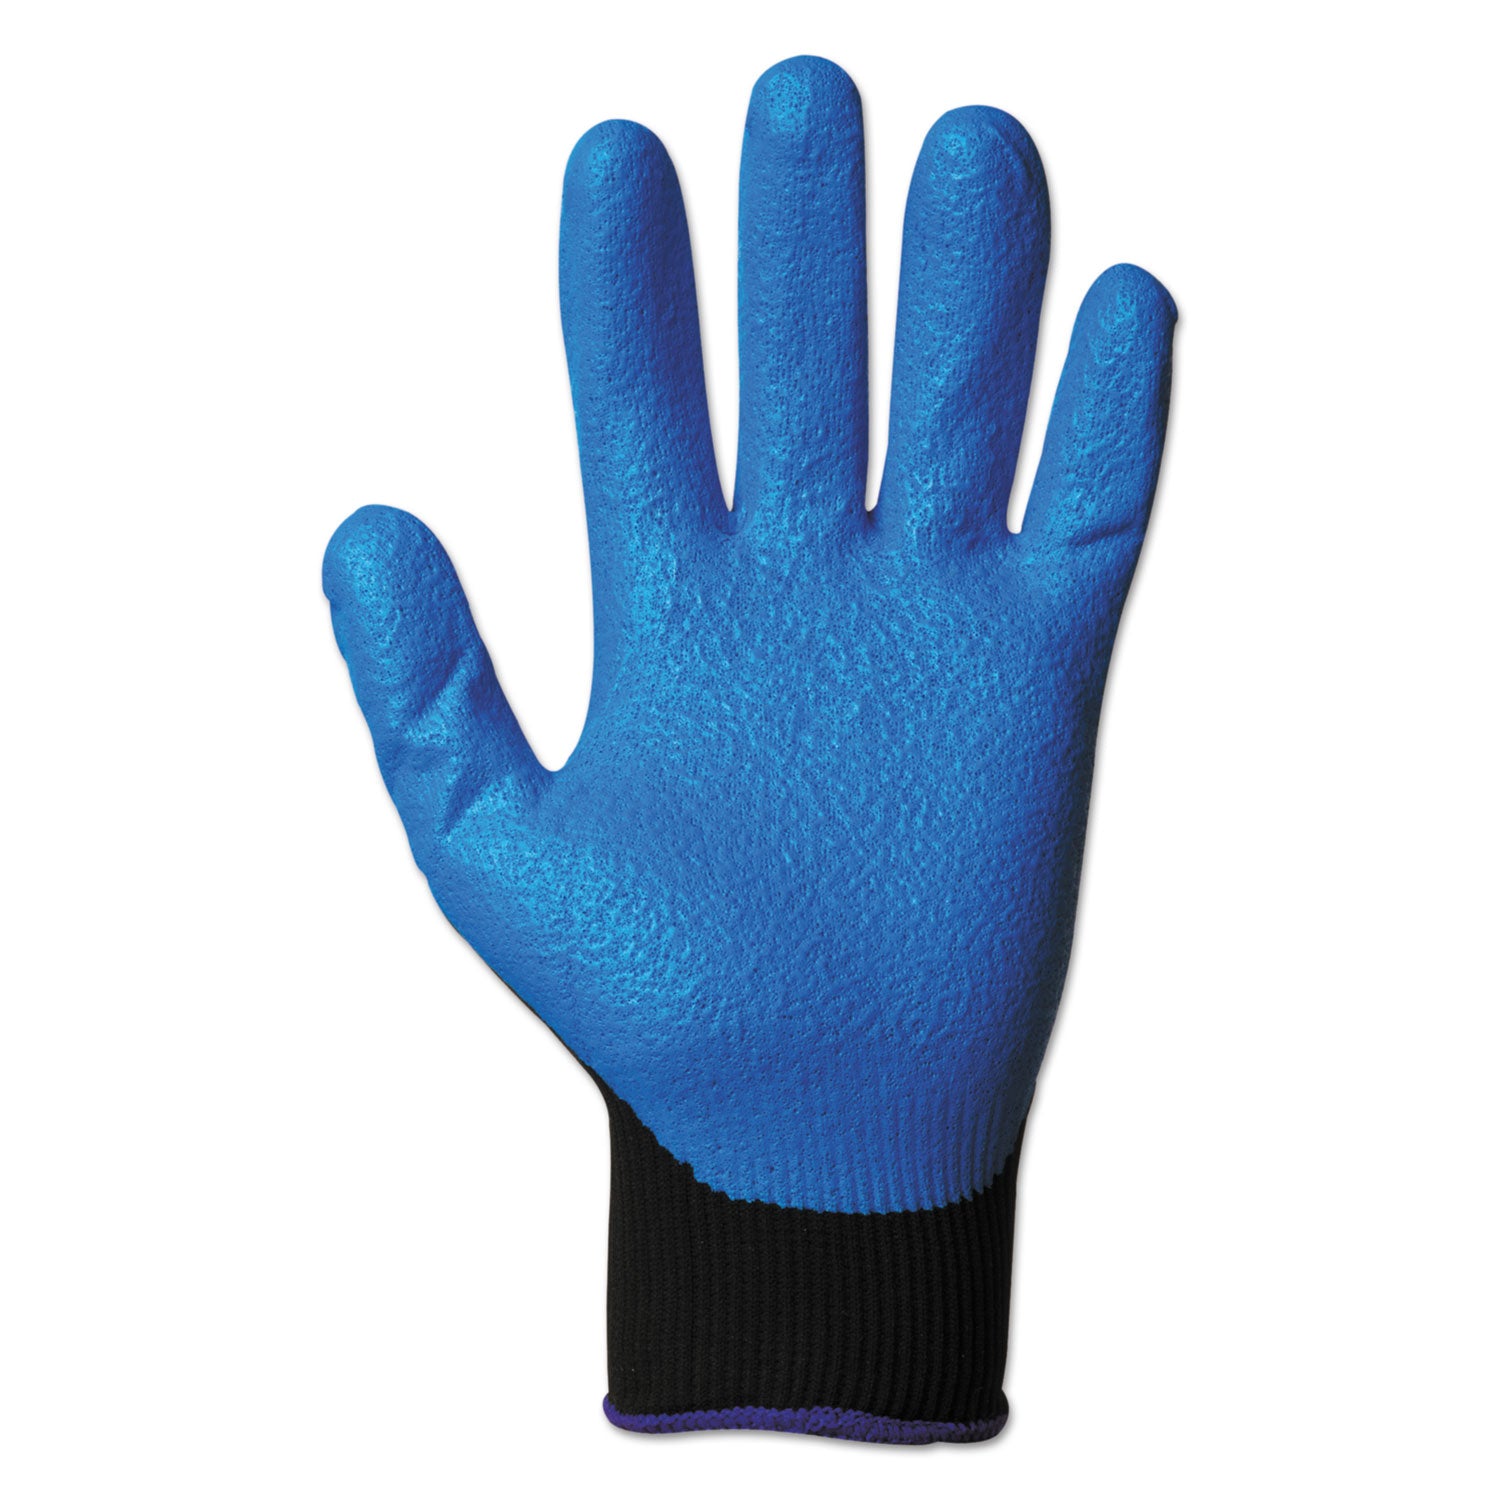 g40-foam-nitrile-coated-gloves-220-mm-length-small-size-7-blue-12-pairs_kcc40225 - 2